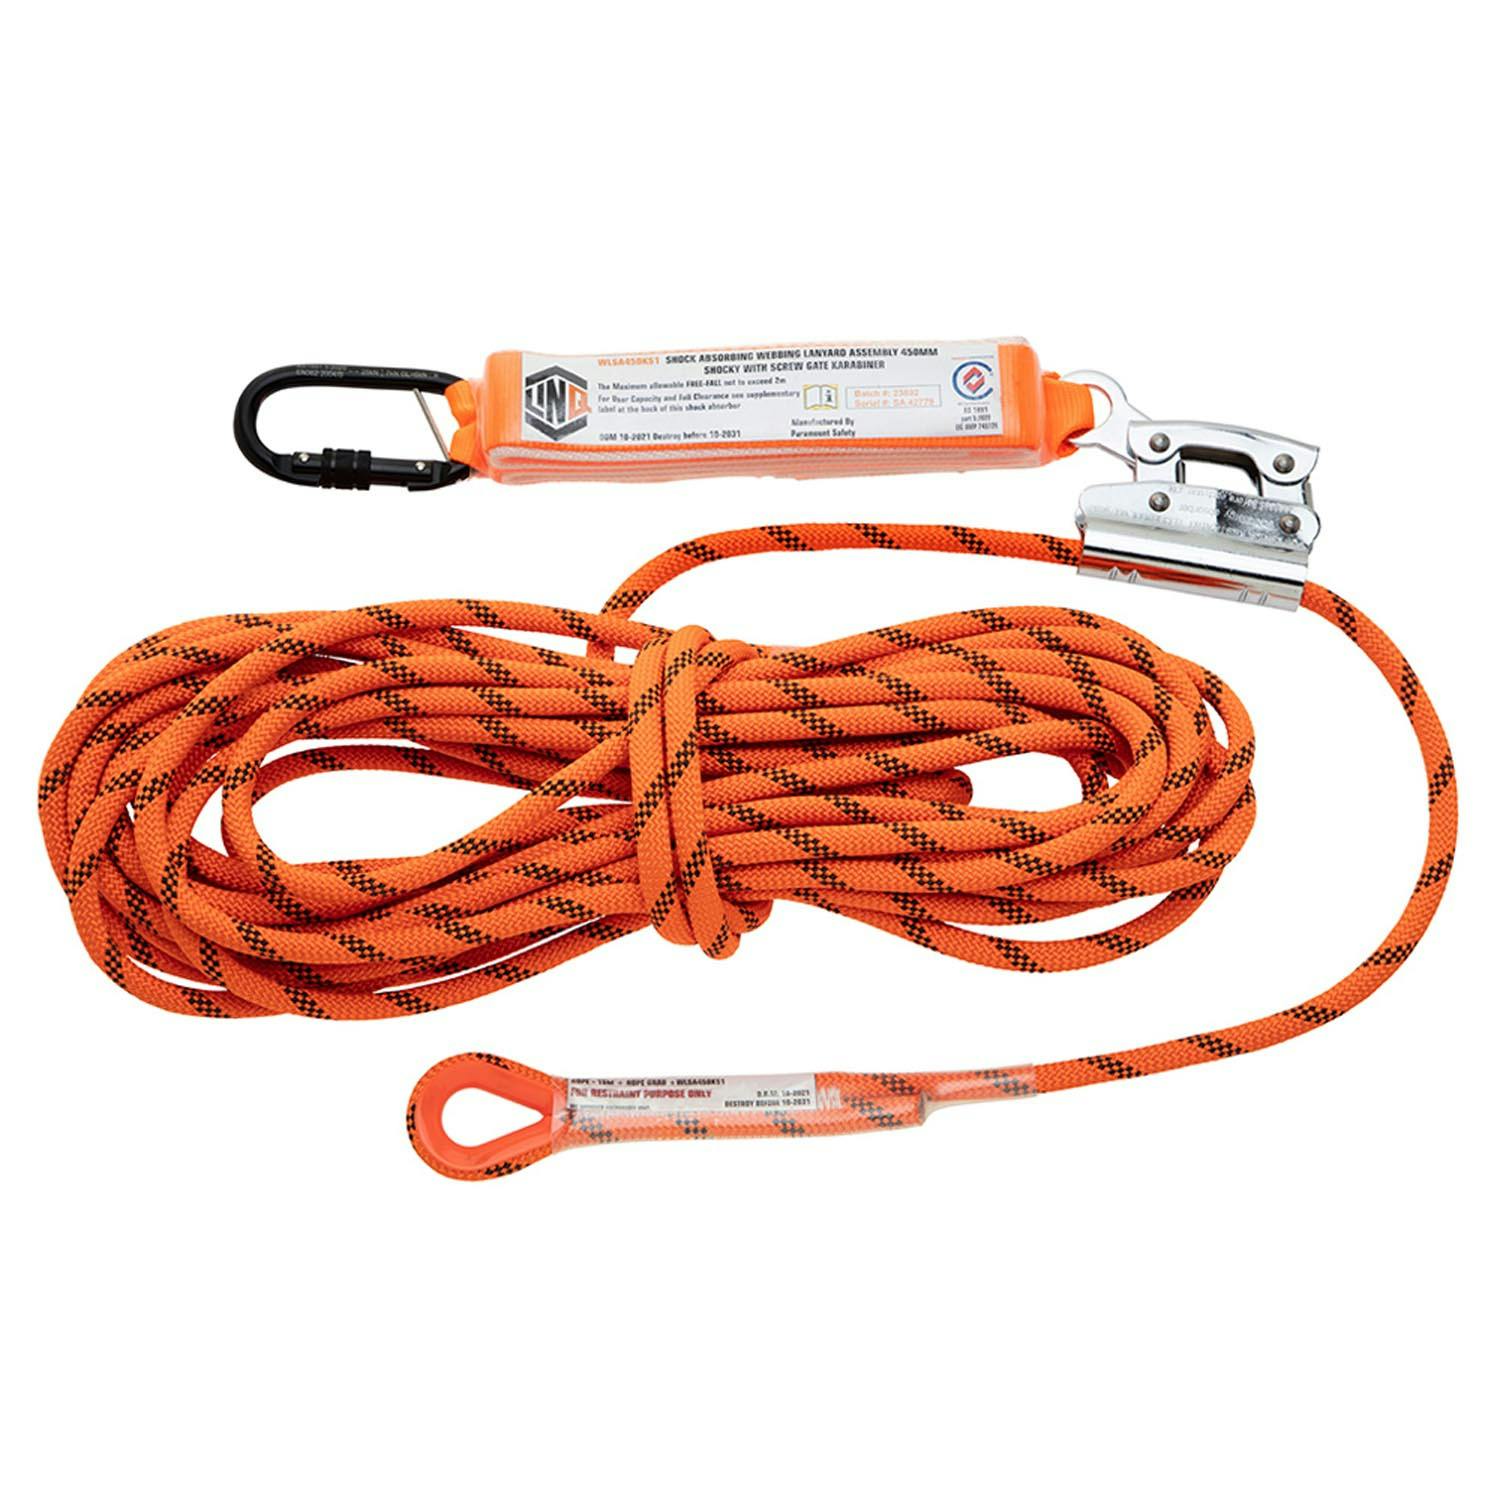 LINQ Rope Kernmantle 15M C/W Rope Grab & Perm Attach Shocky With Screwgate  Kara_0